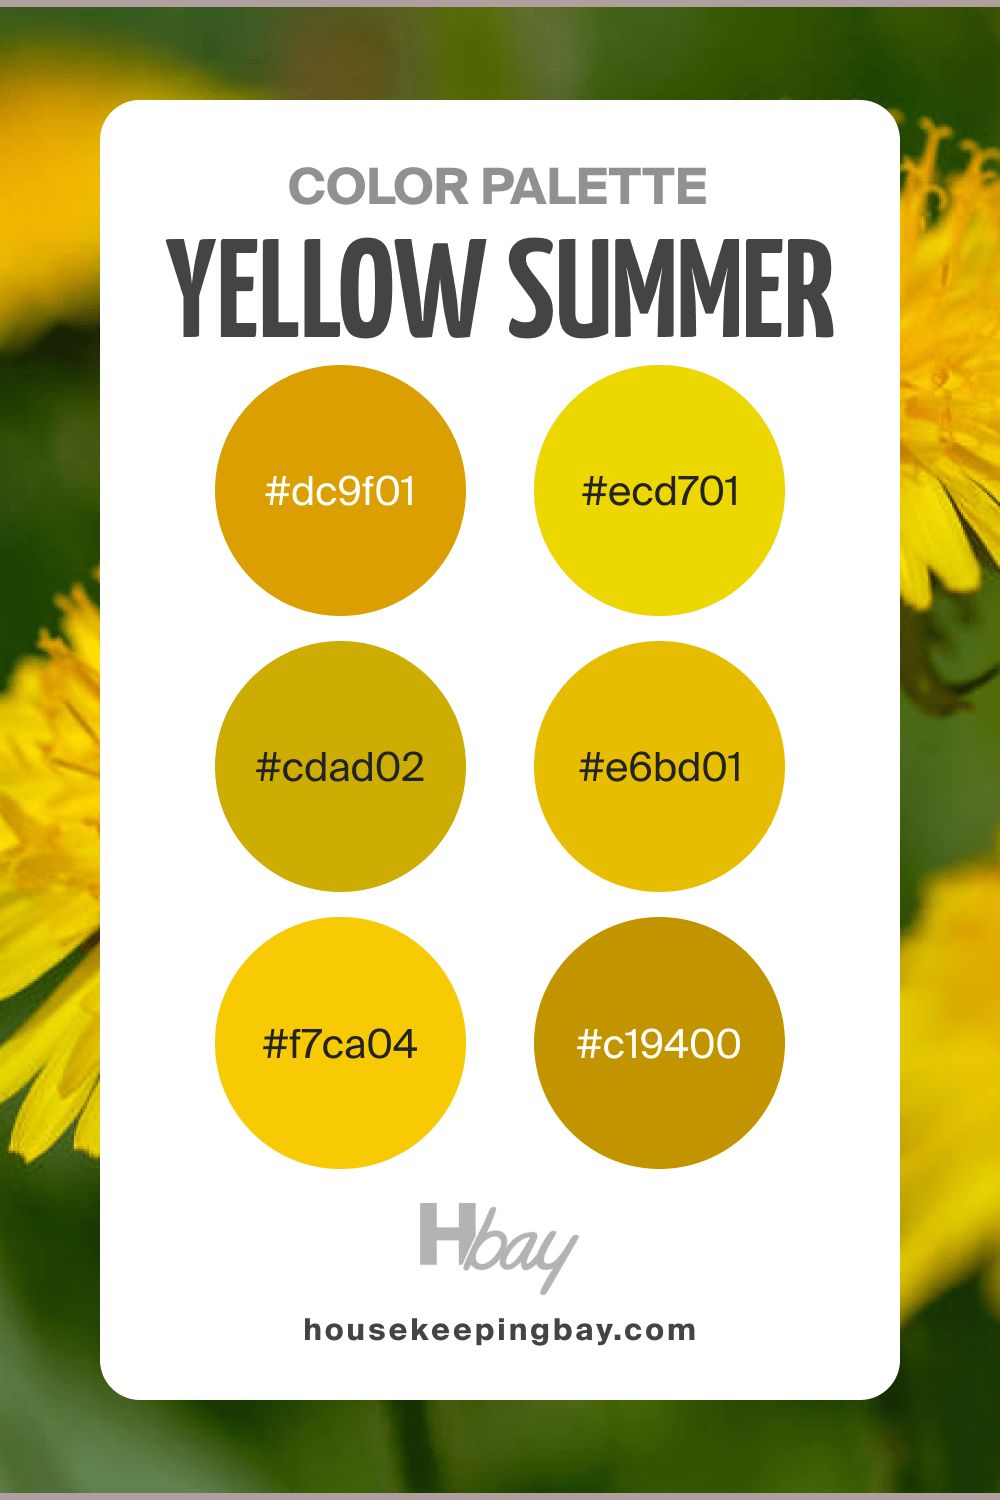 Summer color palette yellow